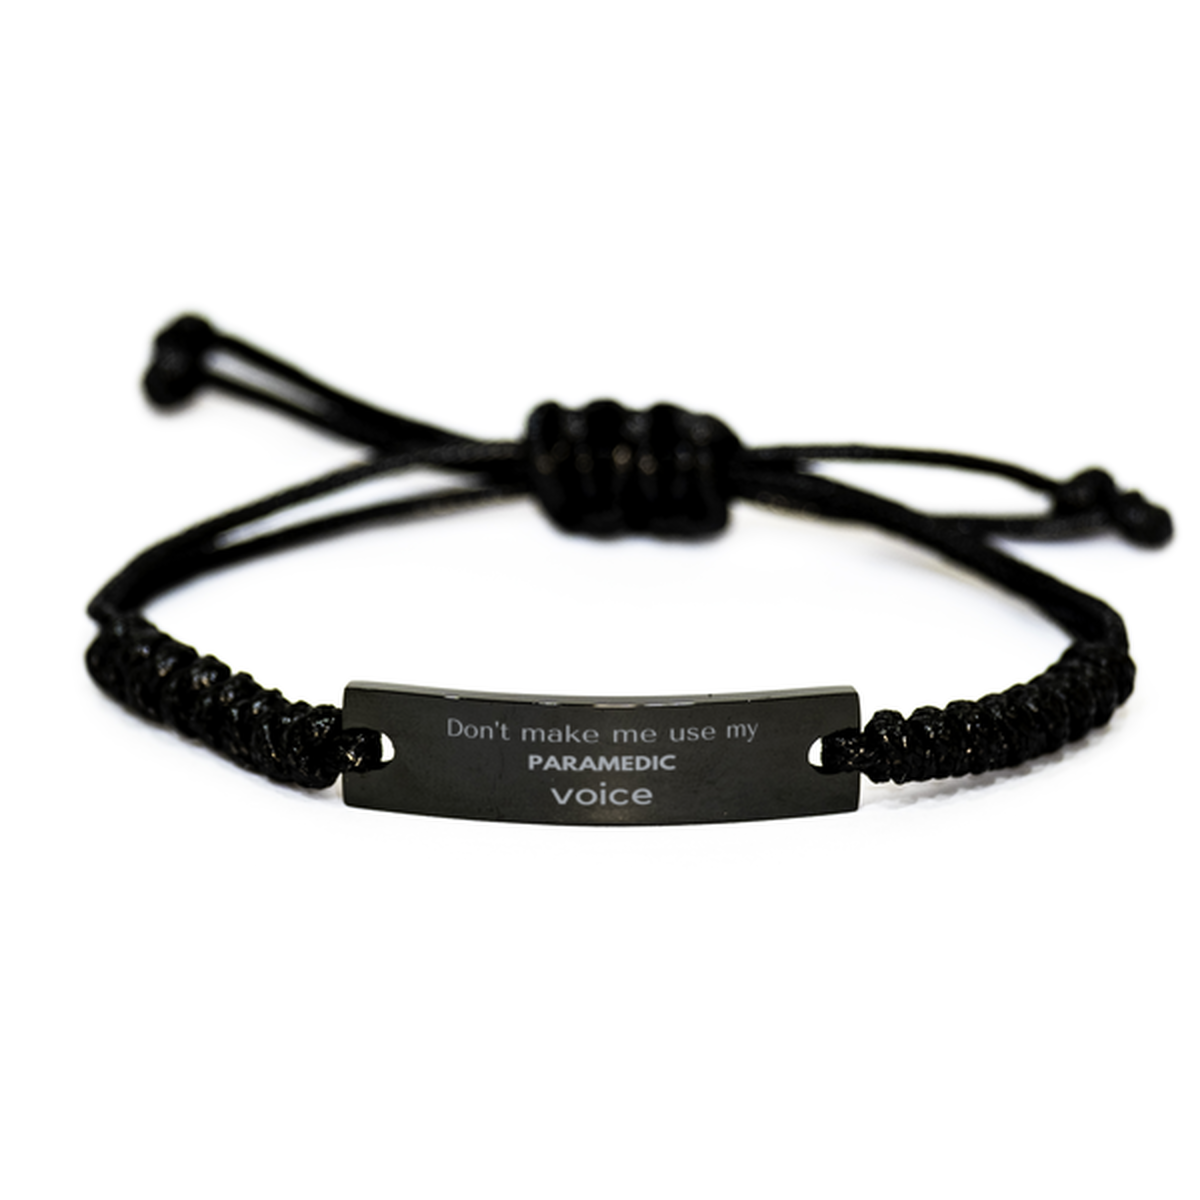 Don't make me use my Paramedic voice, Sarcasm Paramedic Gifts, Christmas Paramedic Black Rope Bracelet Birthday Unique Gifts For Paramedic Coworkers, Men, Women, Colleague, Friends